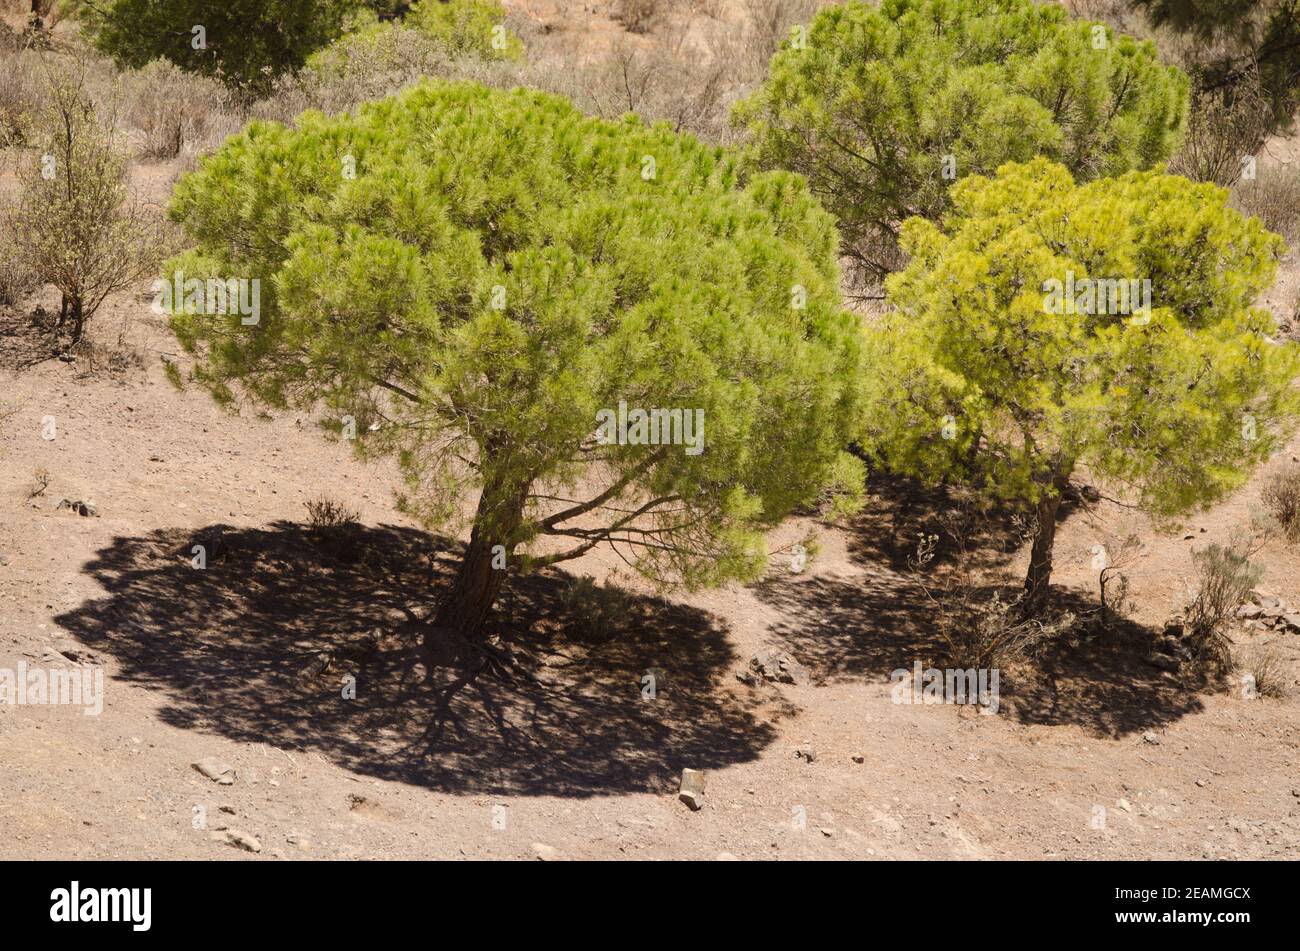 Aleppo pines Pinus halepensis in The Nublo Rural Park. Stock Photo